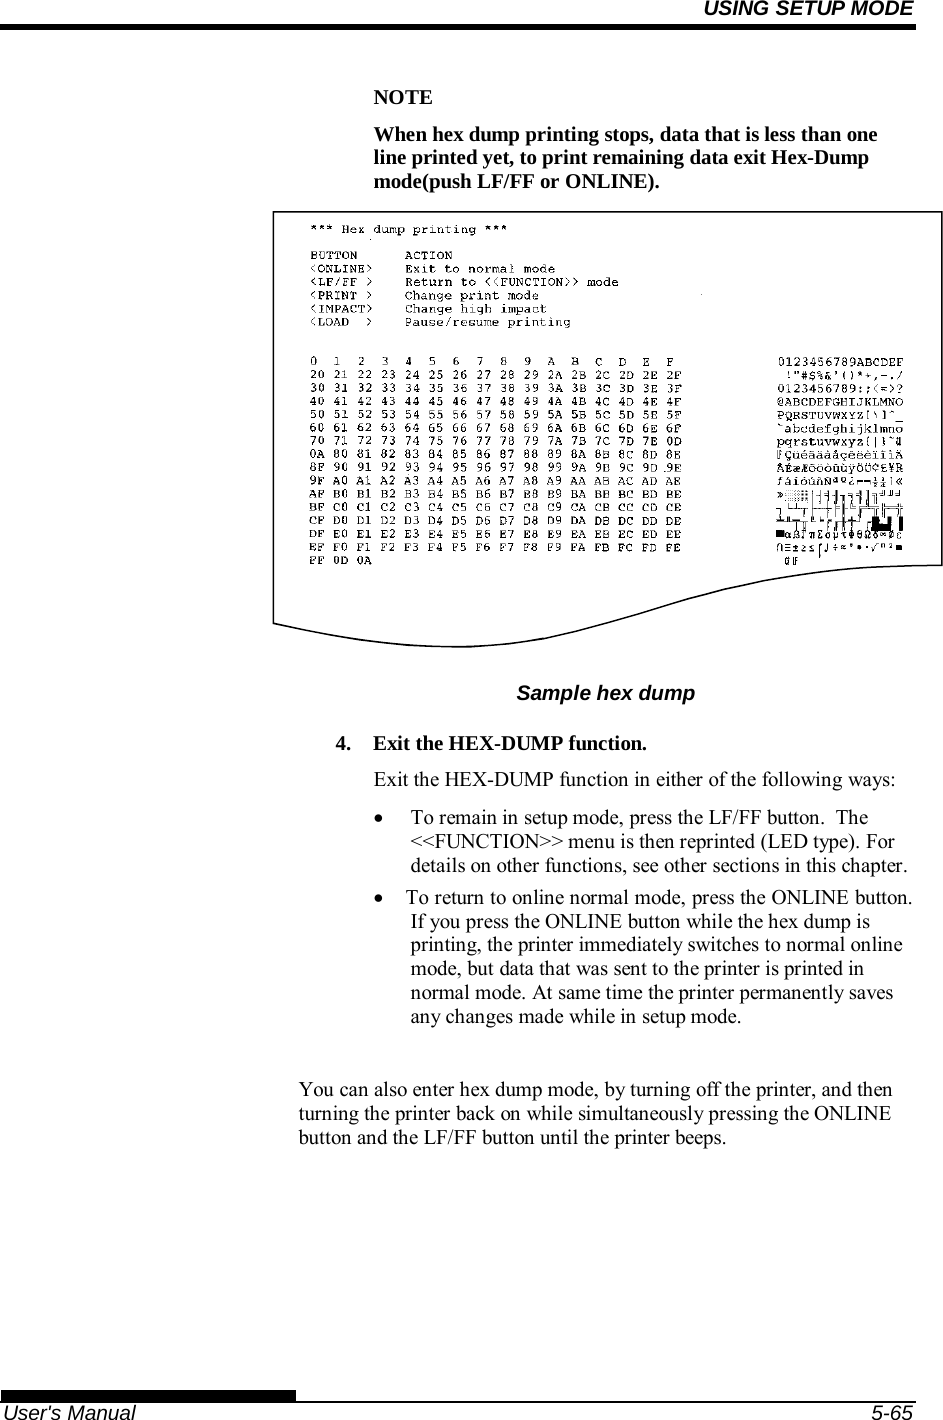 USING SETUP MODE   User&apos;s Manual  5-65 NOTE When hex dump printing stops, data that is less than one line printed yet, to print remaining data exit Hex-Dump mode(push LF/FF or ONLINE).    Sample hex dump 4.  Exit the HEX-DUMP function. Exit the HEX-DUMP function in either of the following ways:   To remain in setup mode, press the LF/FF button.  The &lt;&lt;FUNCTION&gt;&gt; menu is then reprinted (LED type). For details on other functions, see other sections in this chapter.   To return to online normal mode, press the ONLINE button. If you press the ONLINE button while the hex dump is printing, the printer immediately switches to normal online mode, but data that was sent to the printer is printed in normal mode. At same time the printer permanently saves any changes made while in setup mode.  You can also enter hex dump mode, by turning off the printer, and then turning the printer back on while simultaneously pressing the ONLINE button and the LF/FF button until the printer beeps. 